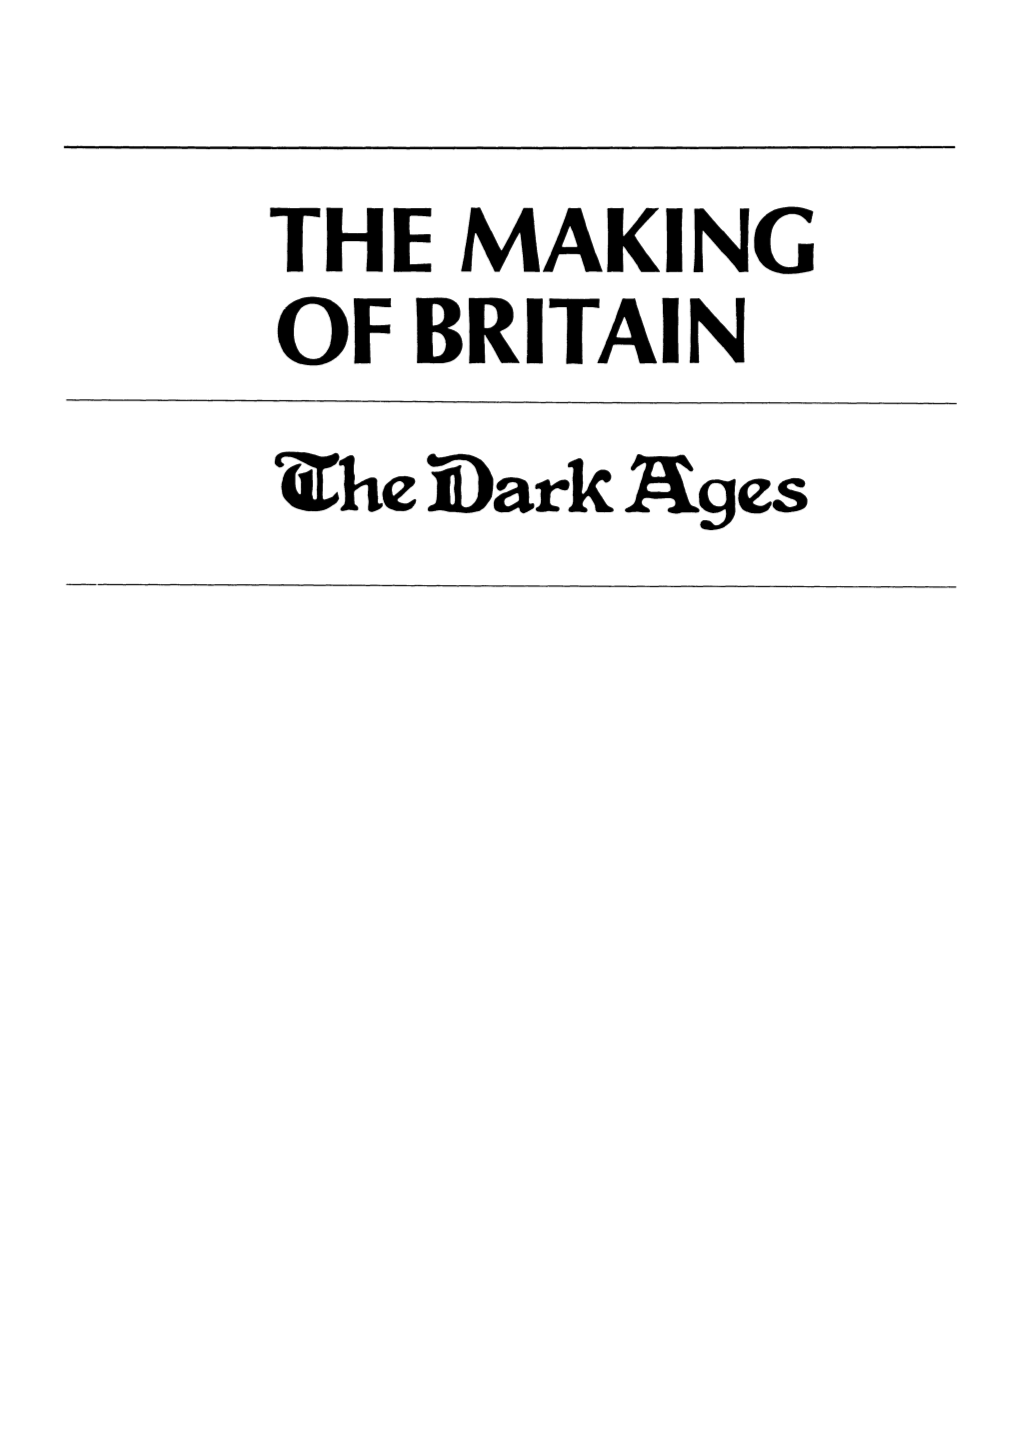 THE MAKING of BRITAIN Lithe Dark Ages the MAKING of BRITAIN 'Idle Dark Ages